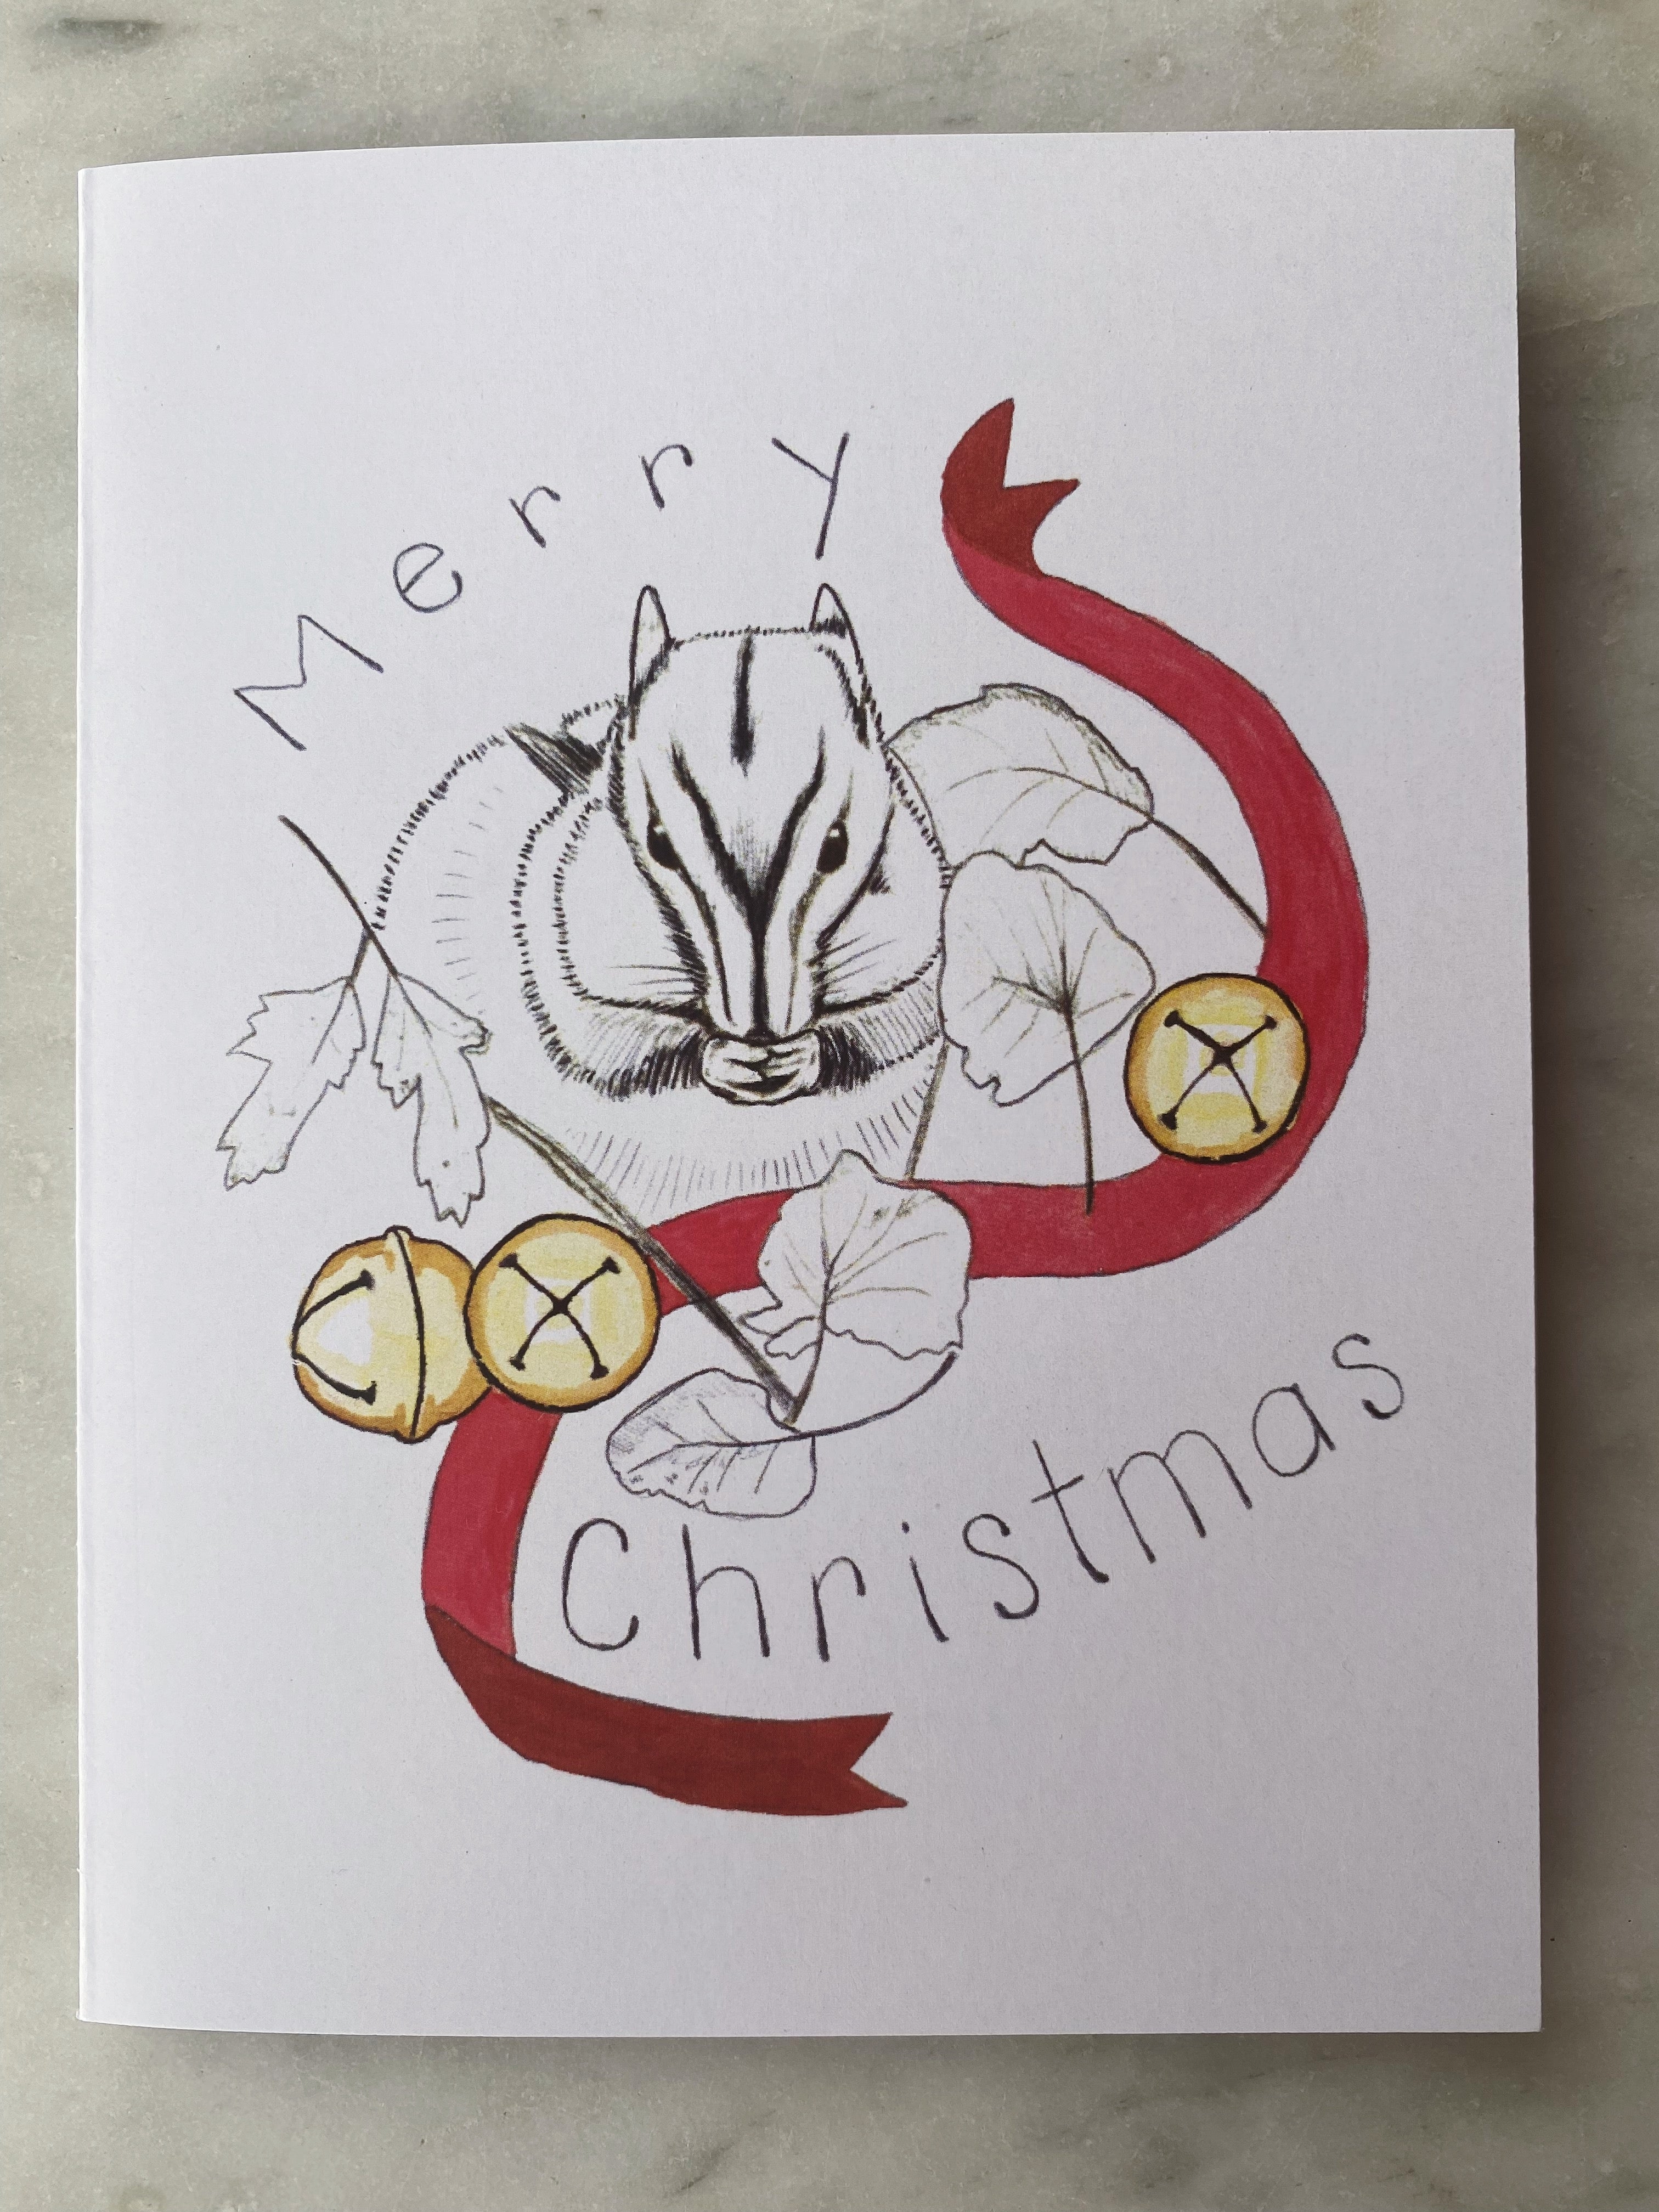 my art teacher wanted us to make christmas cards and I couldn't help myself  : r/ChainsawMan